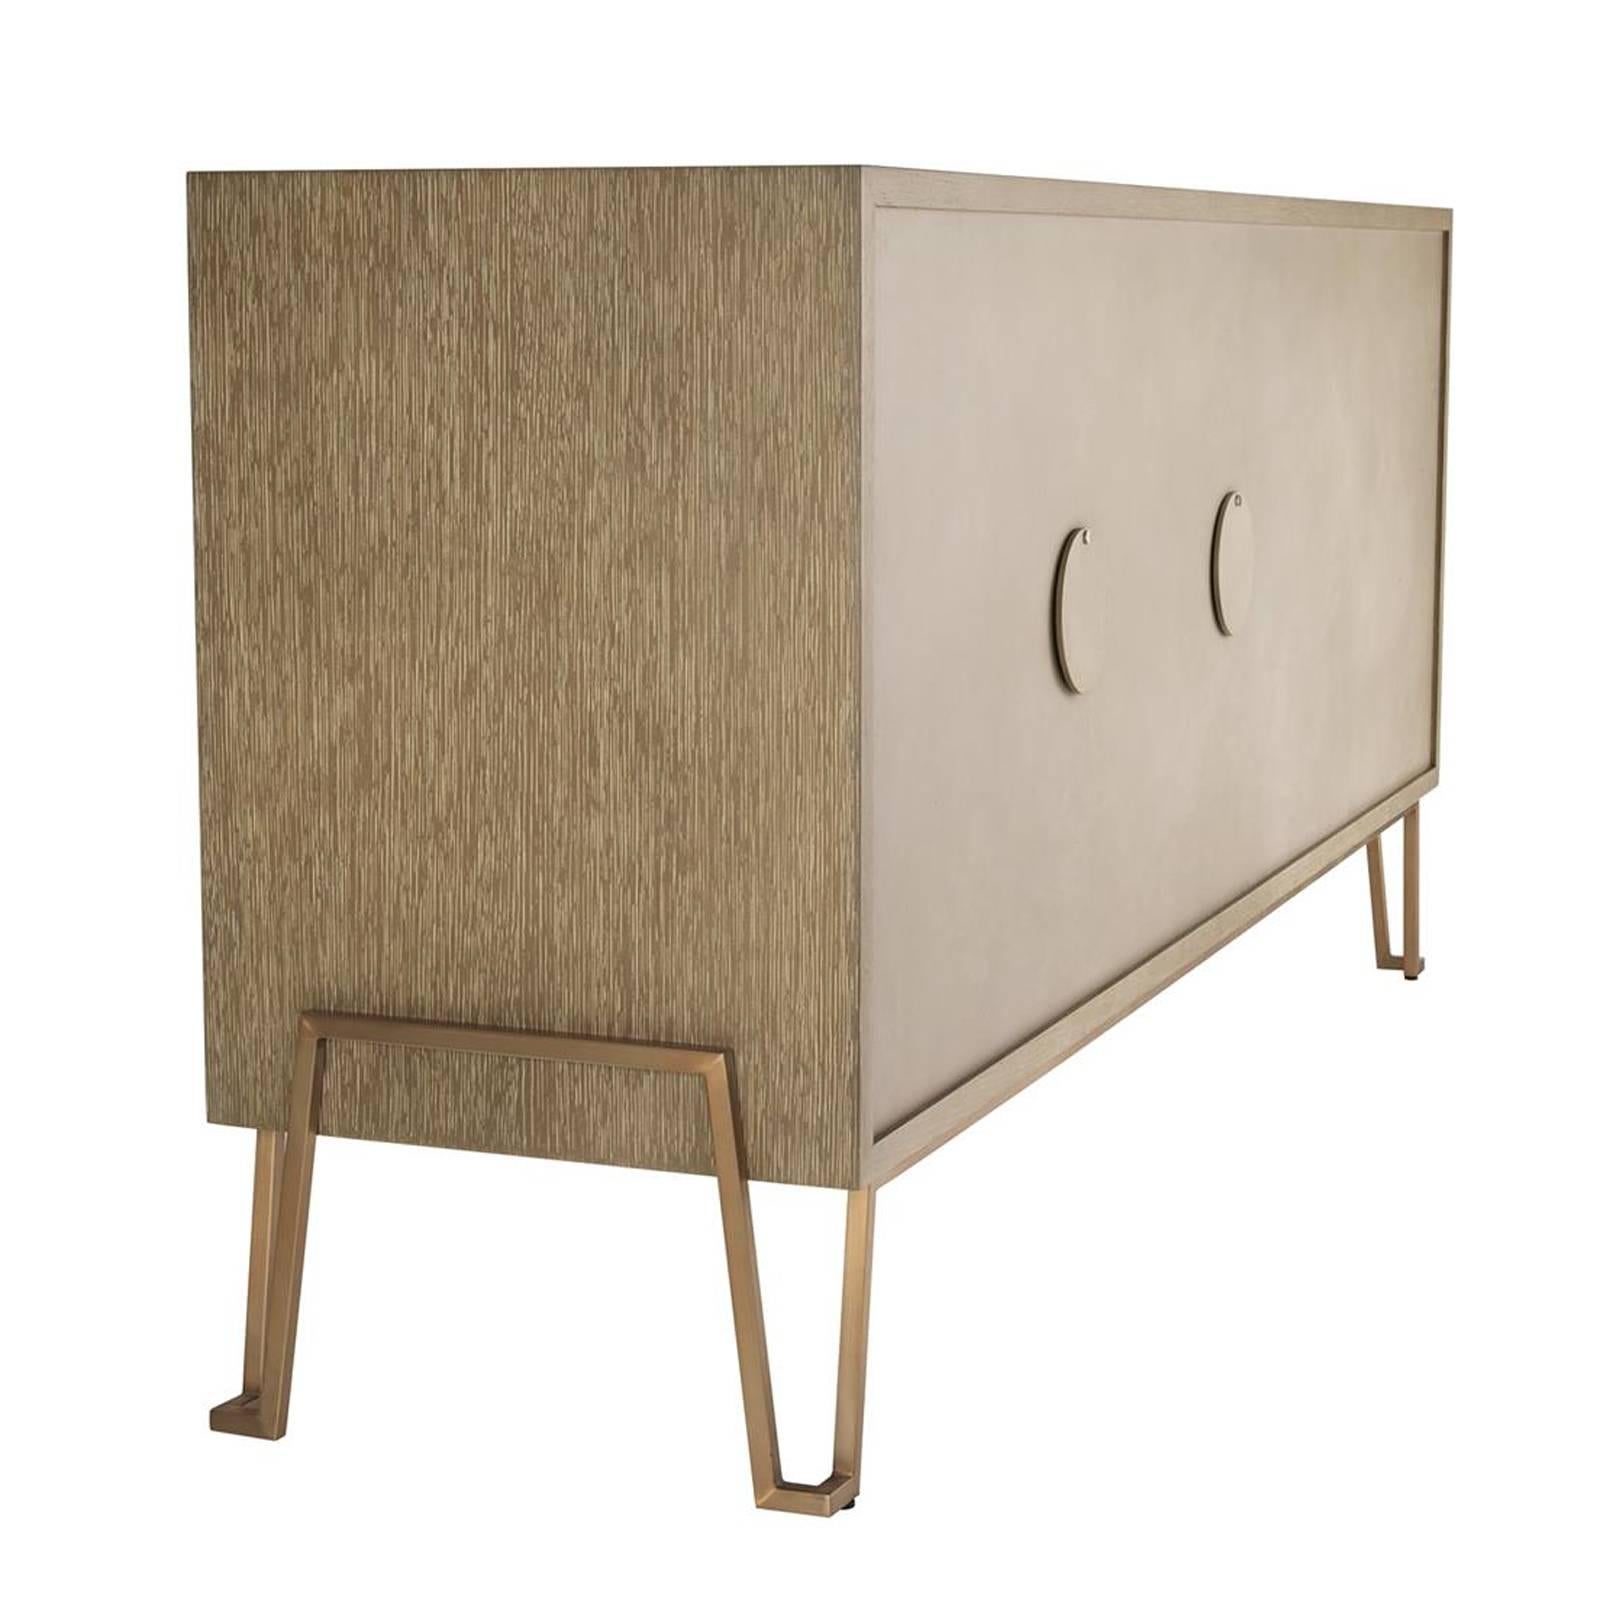 Indonesian Catalaga Sideboard in Washed Oak Veneer and Brass Finish For Sale